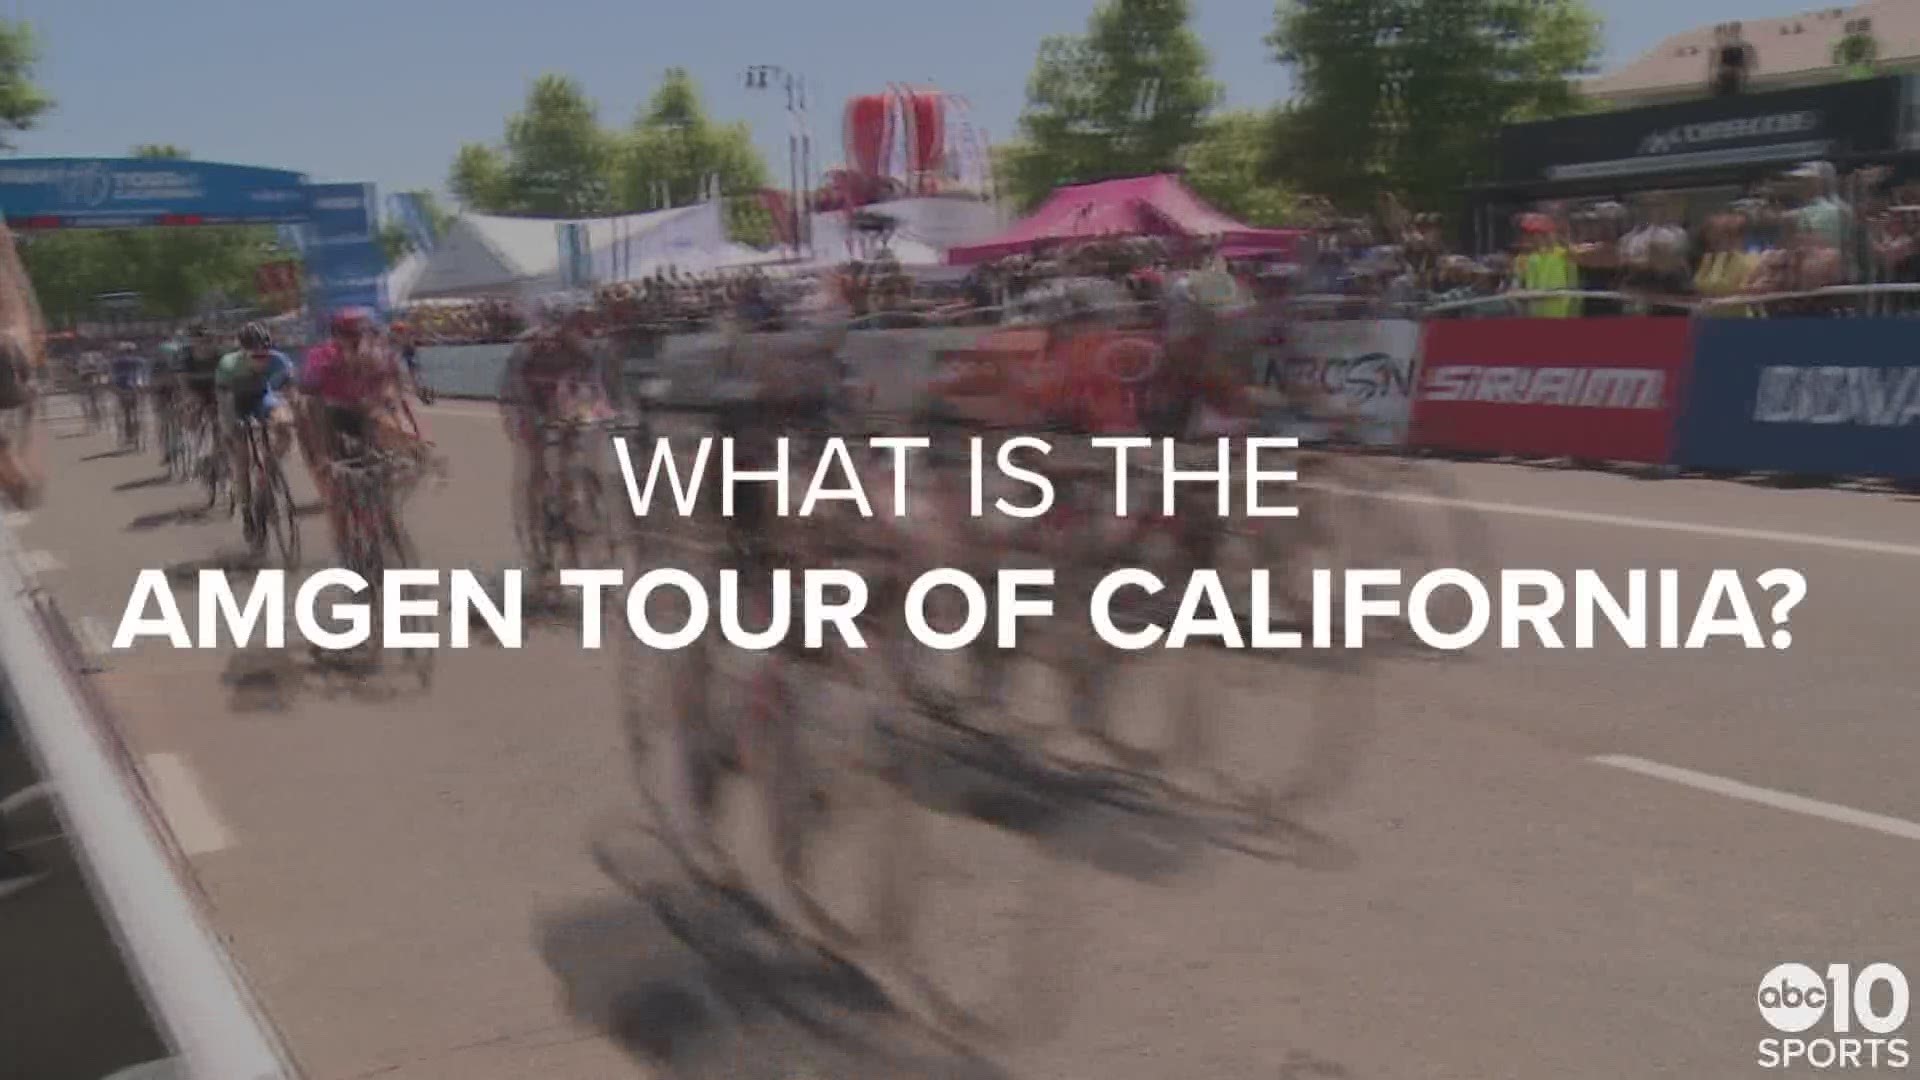 Every year since 2006, Sacramento has served as a host city for the biggest cycling event in North America.